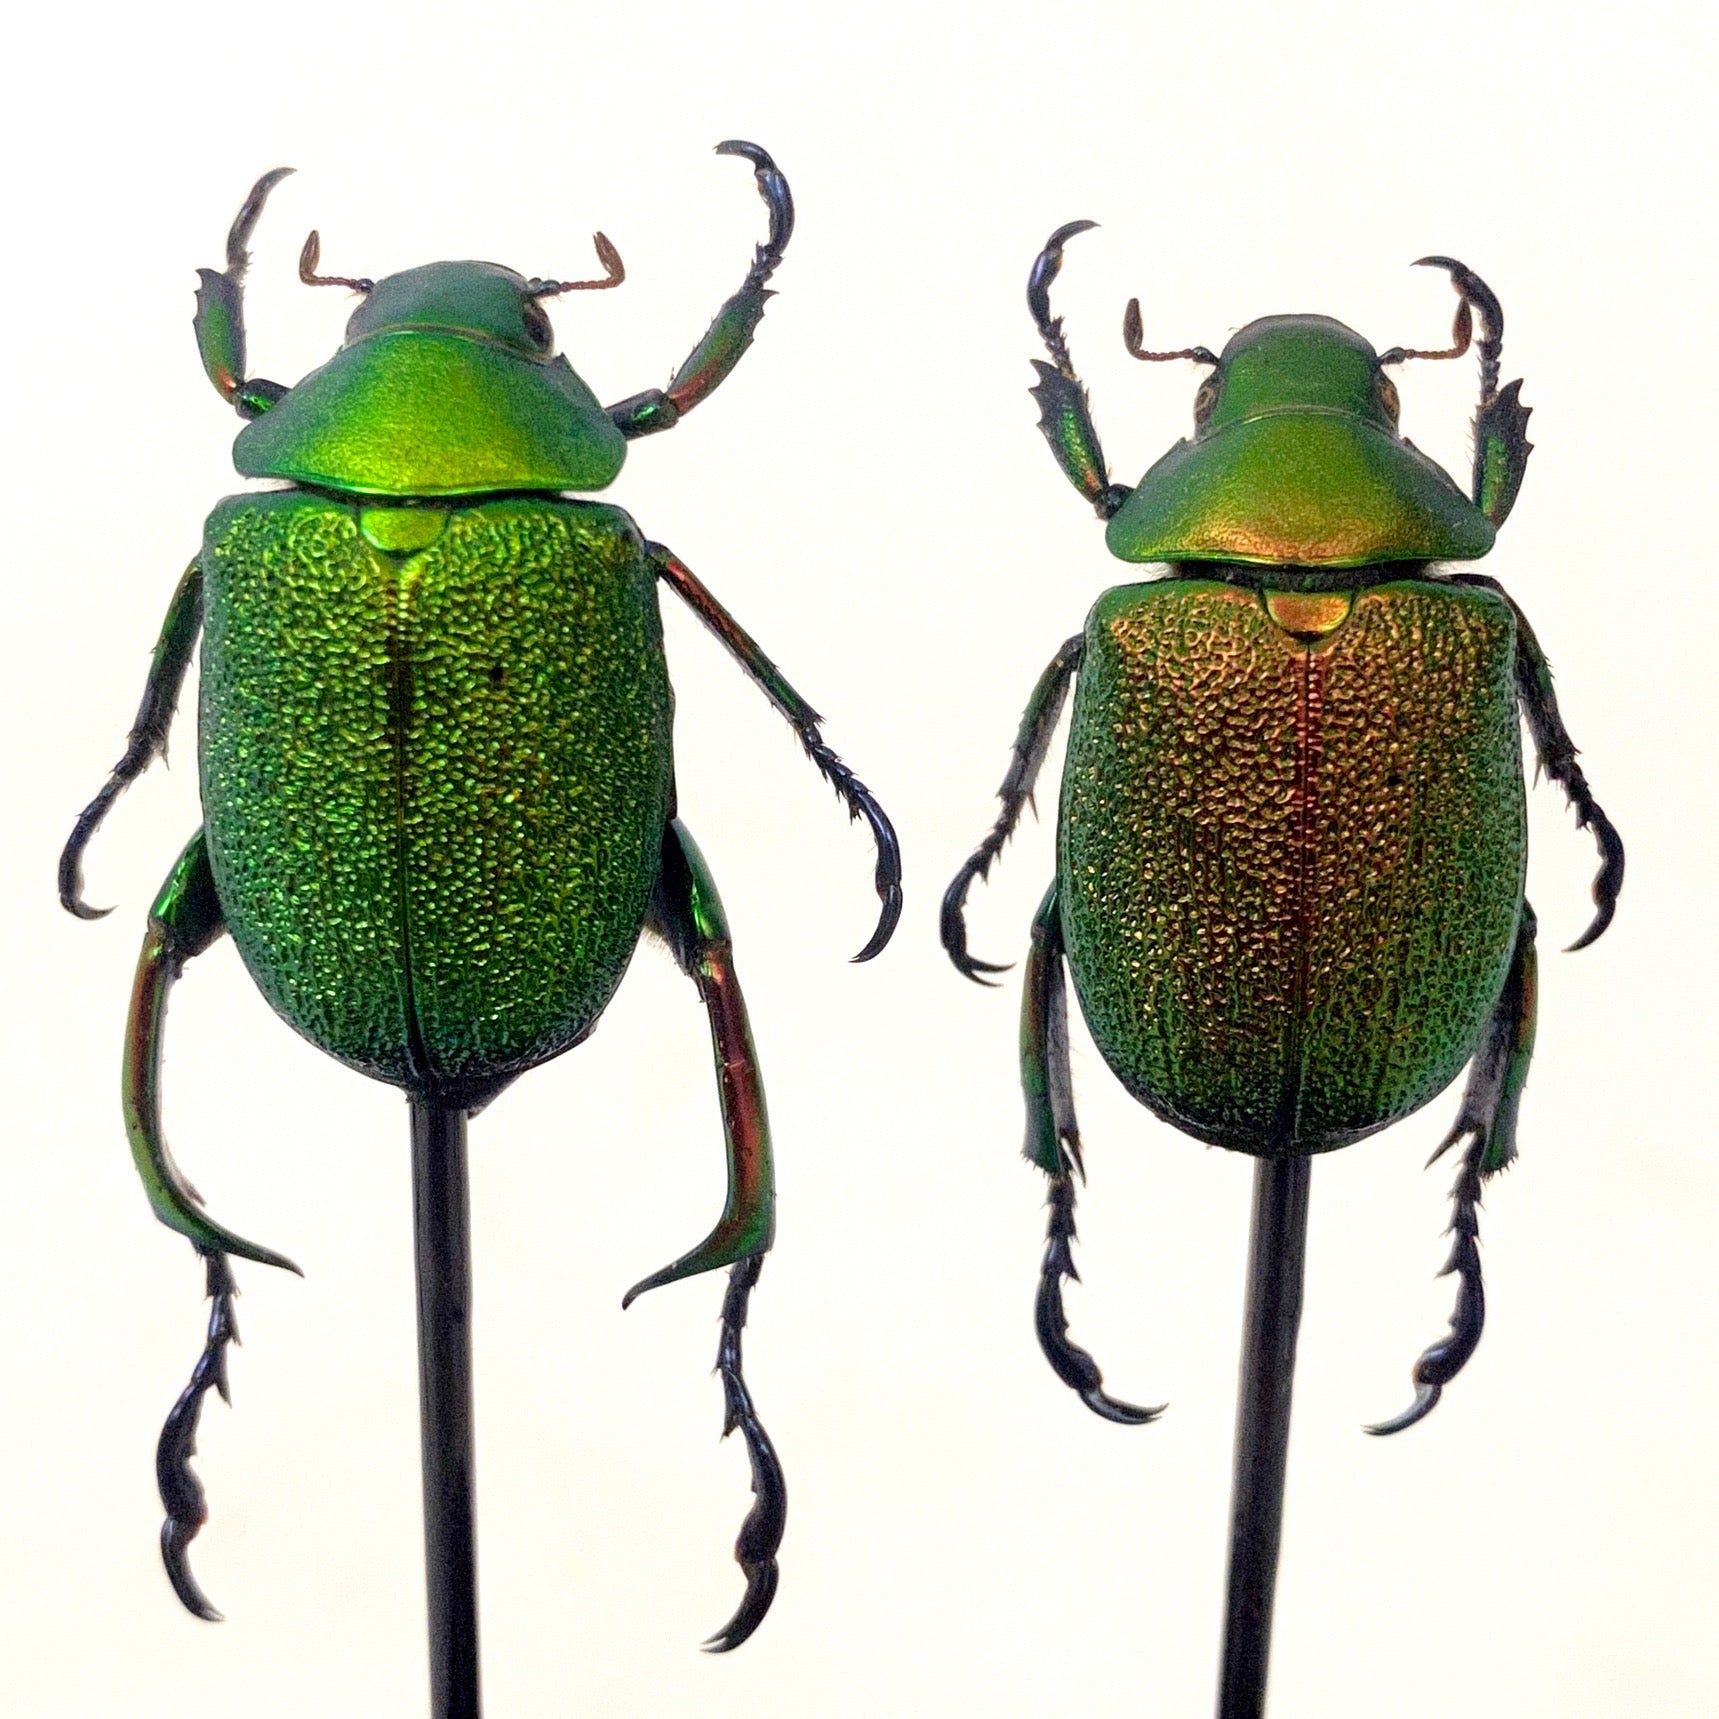 Striking Pair of male and female of emerald  green jewel beetles in a vintage glass dome.